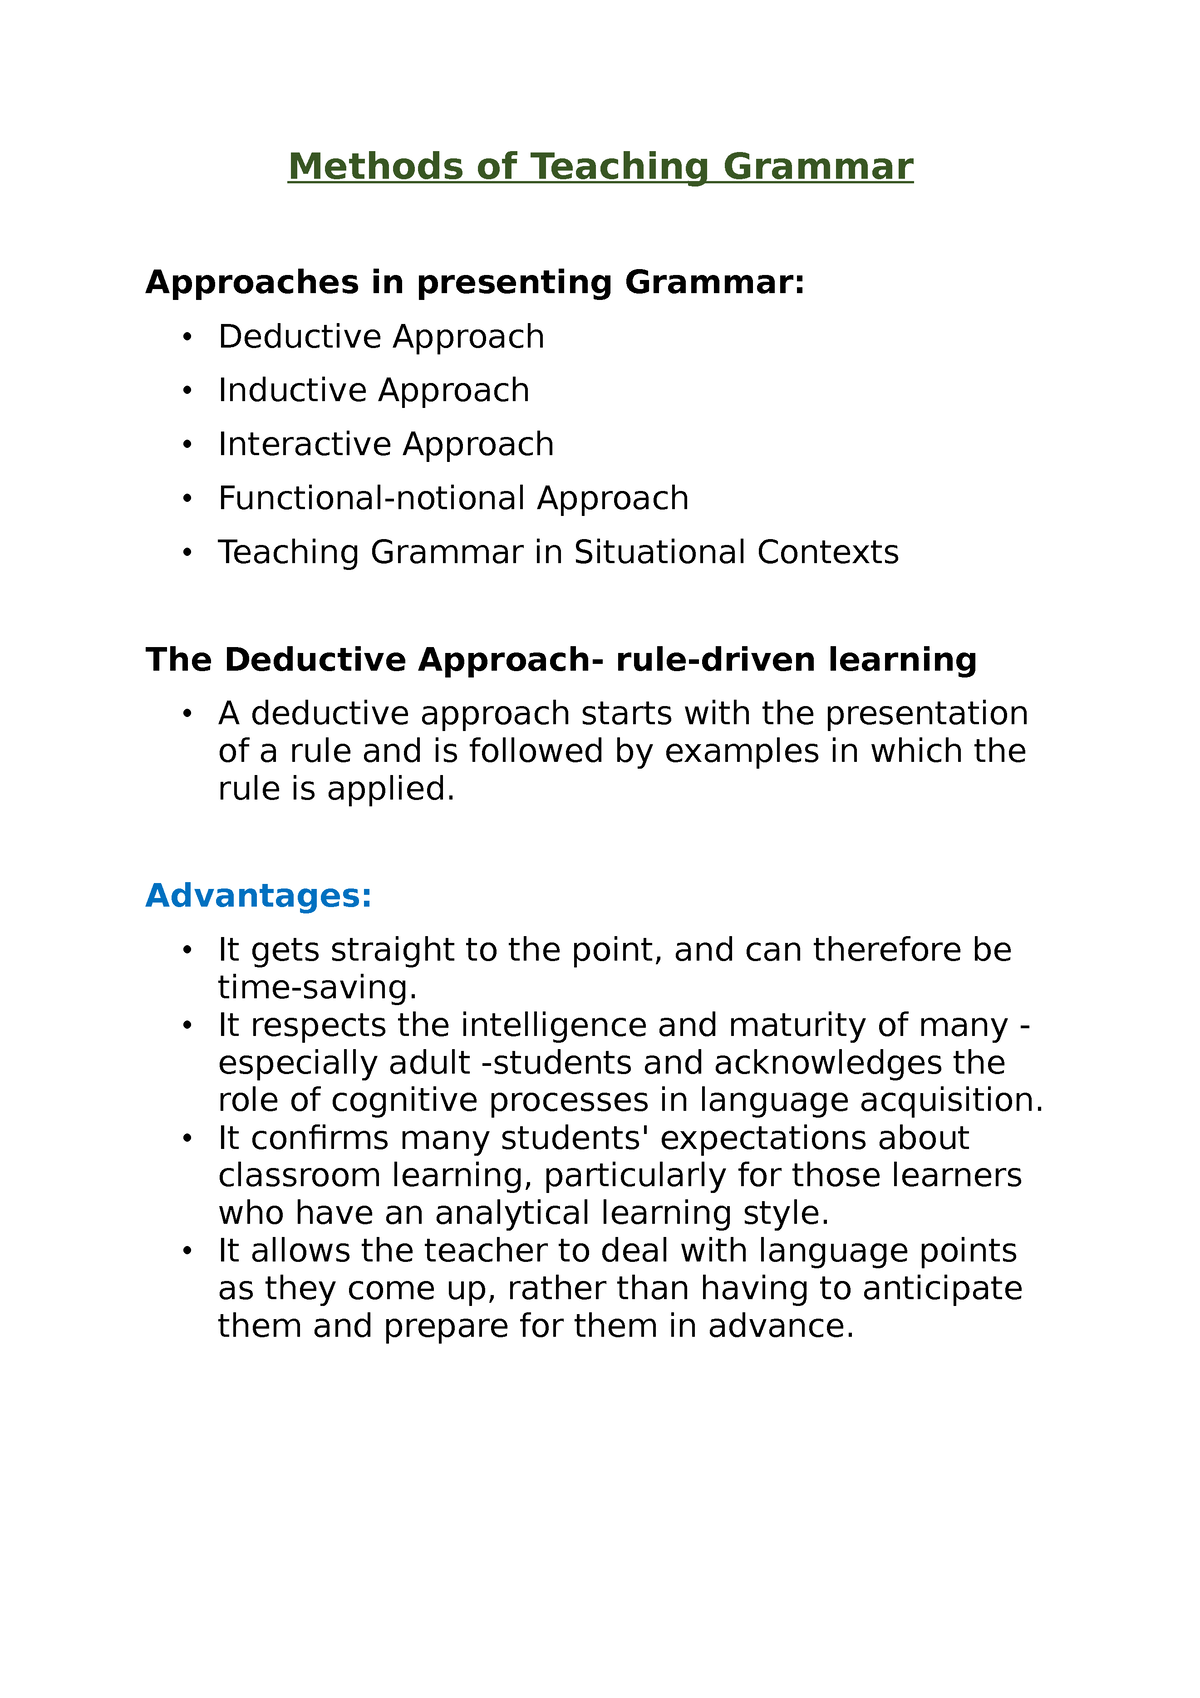 What is an example of interactive method of teaching grammar?